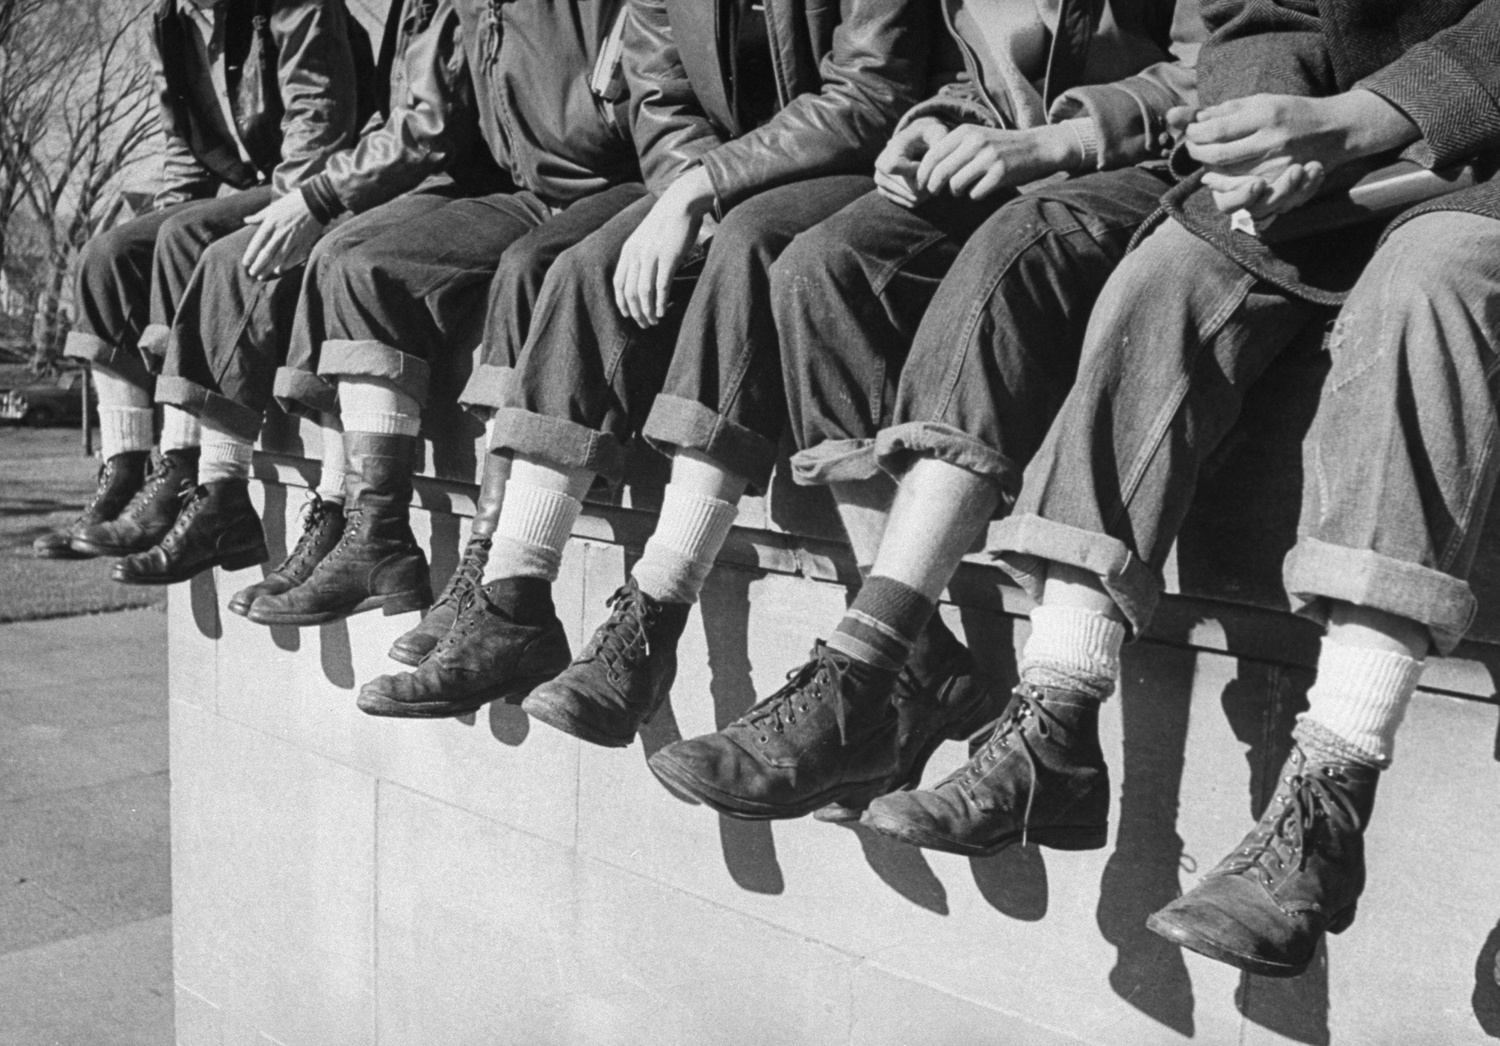 Tuesday's shoes are current phenomenon in Des Moines. Every Tuesday high-school boys wear GI shoes, bought at surplus store or inherited from an older brother and called "my old lady's" Army shoes."